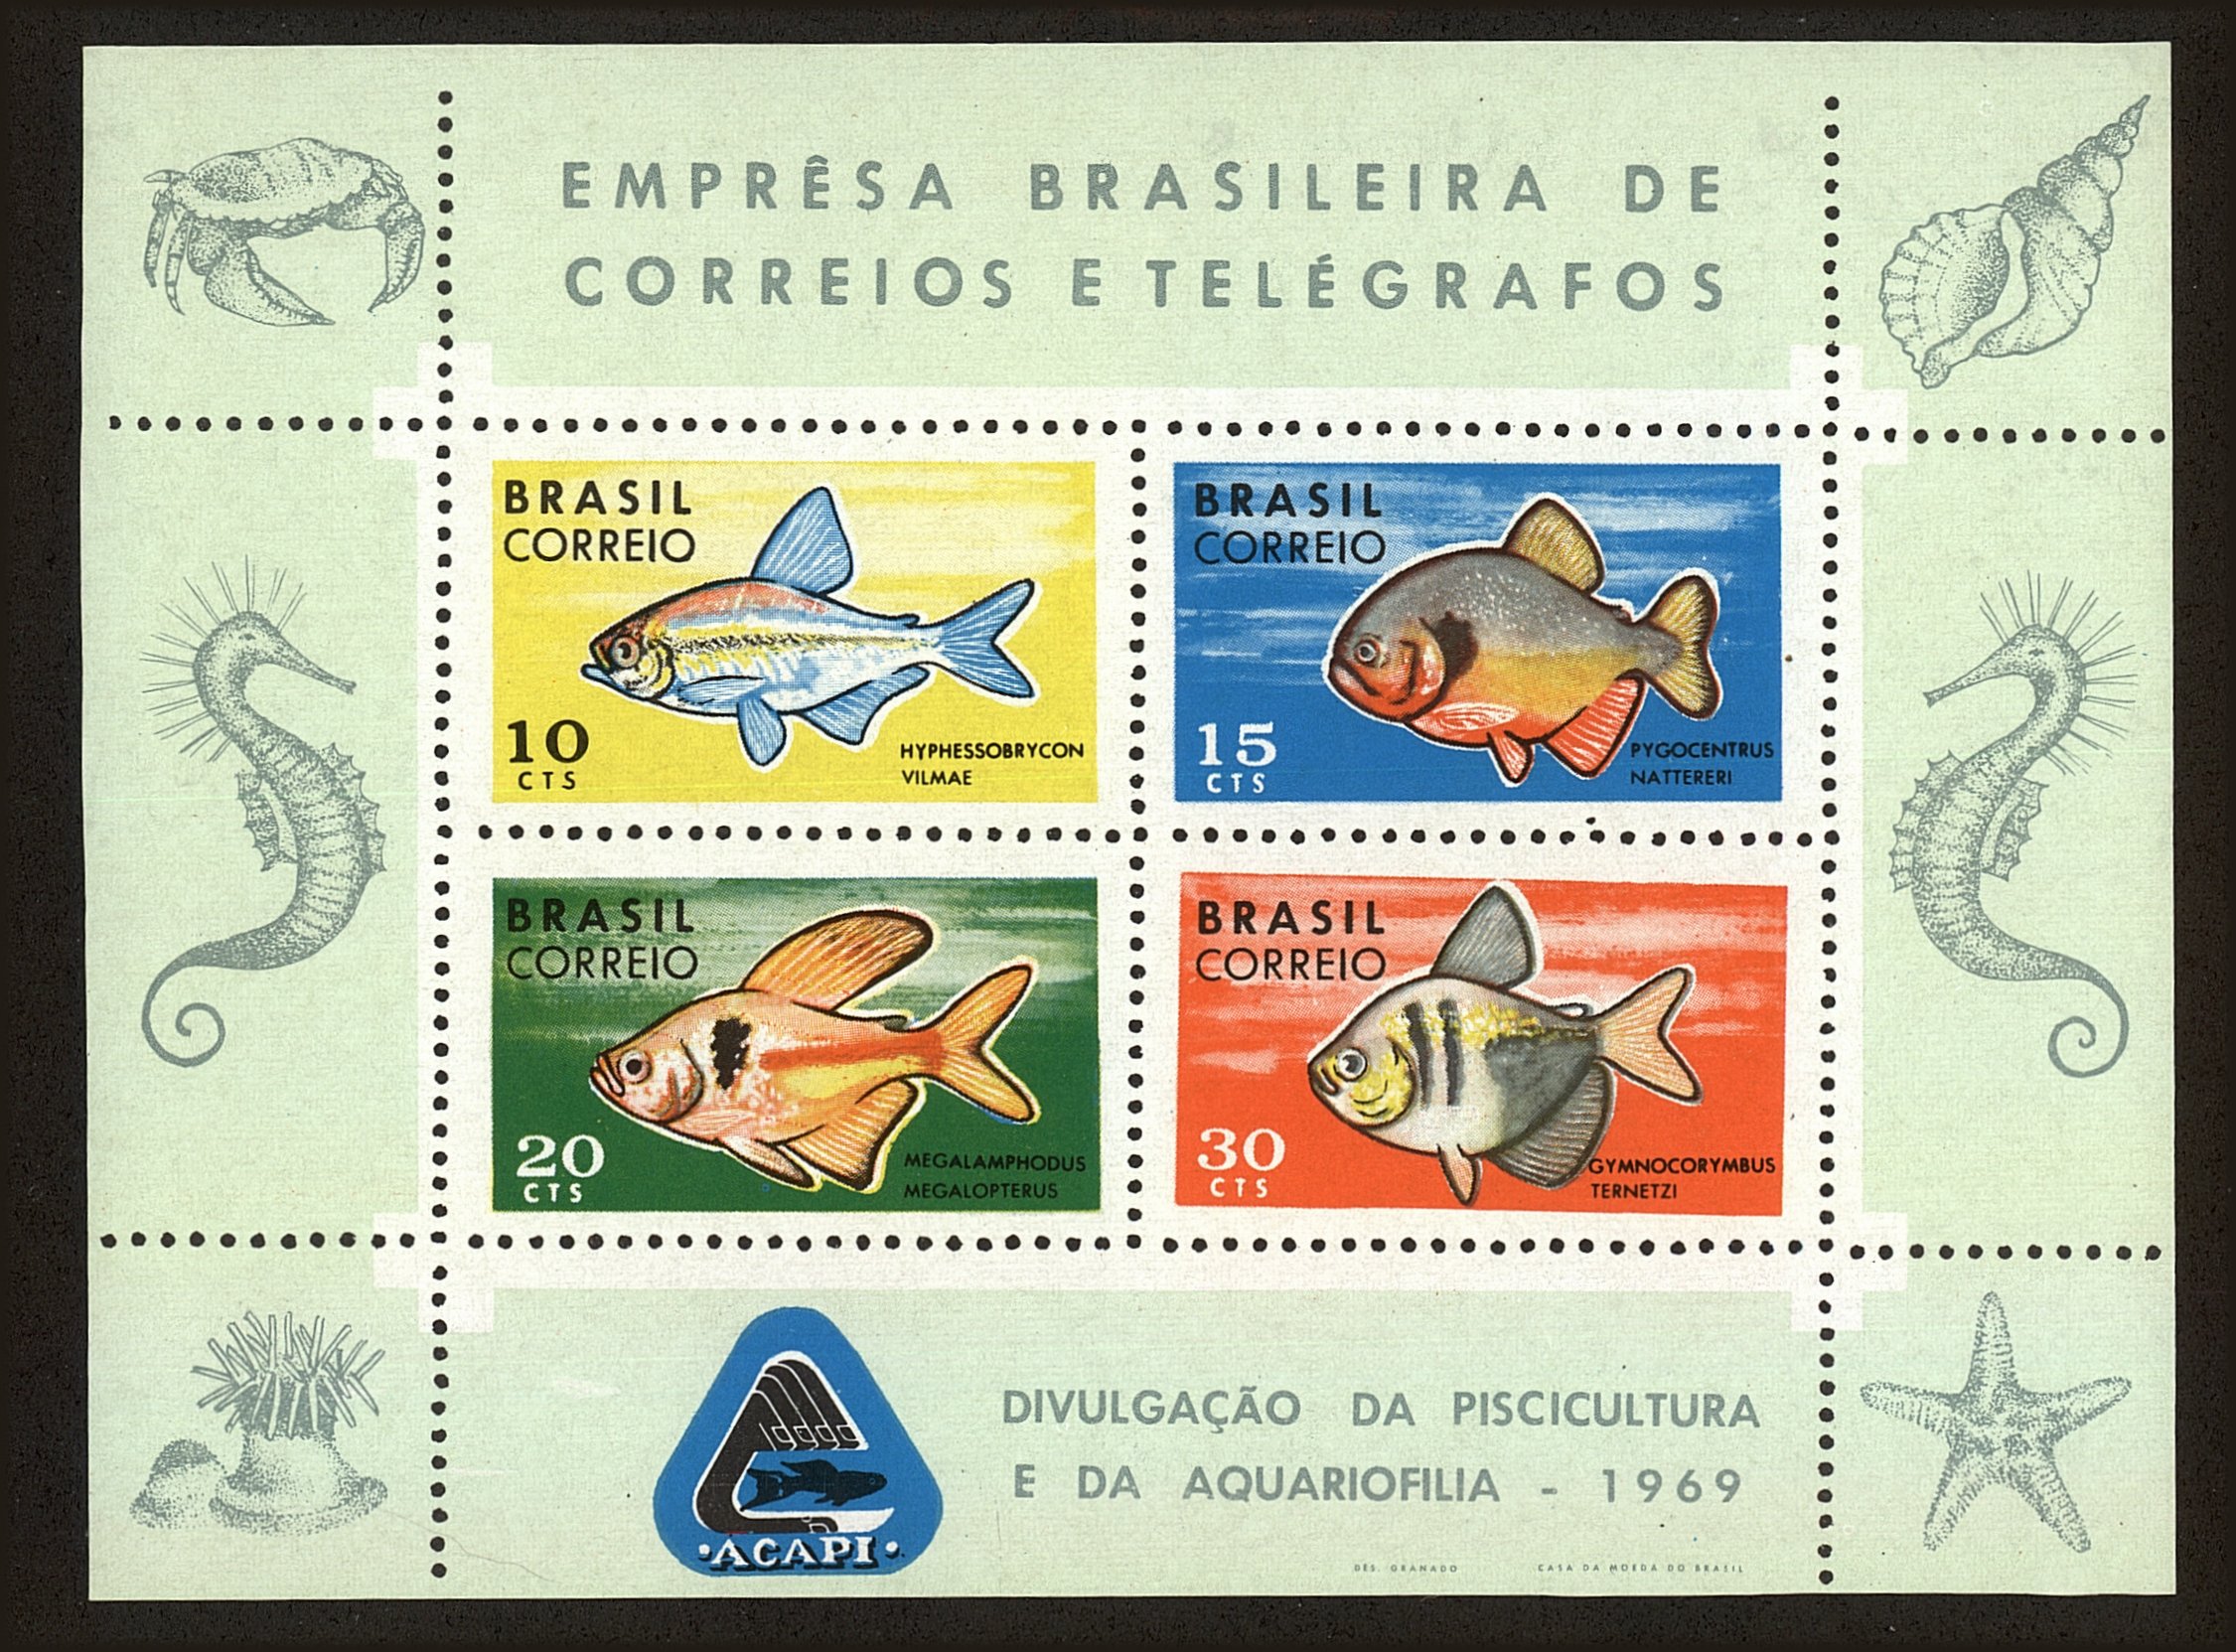 Front view of Brazil 1130 collectors stamp